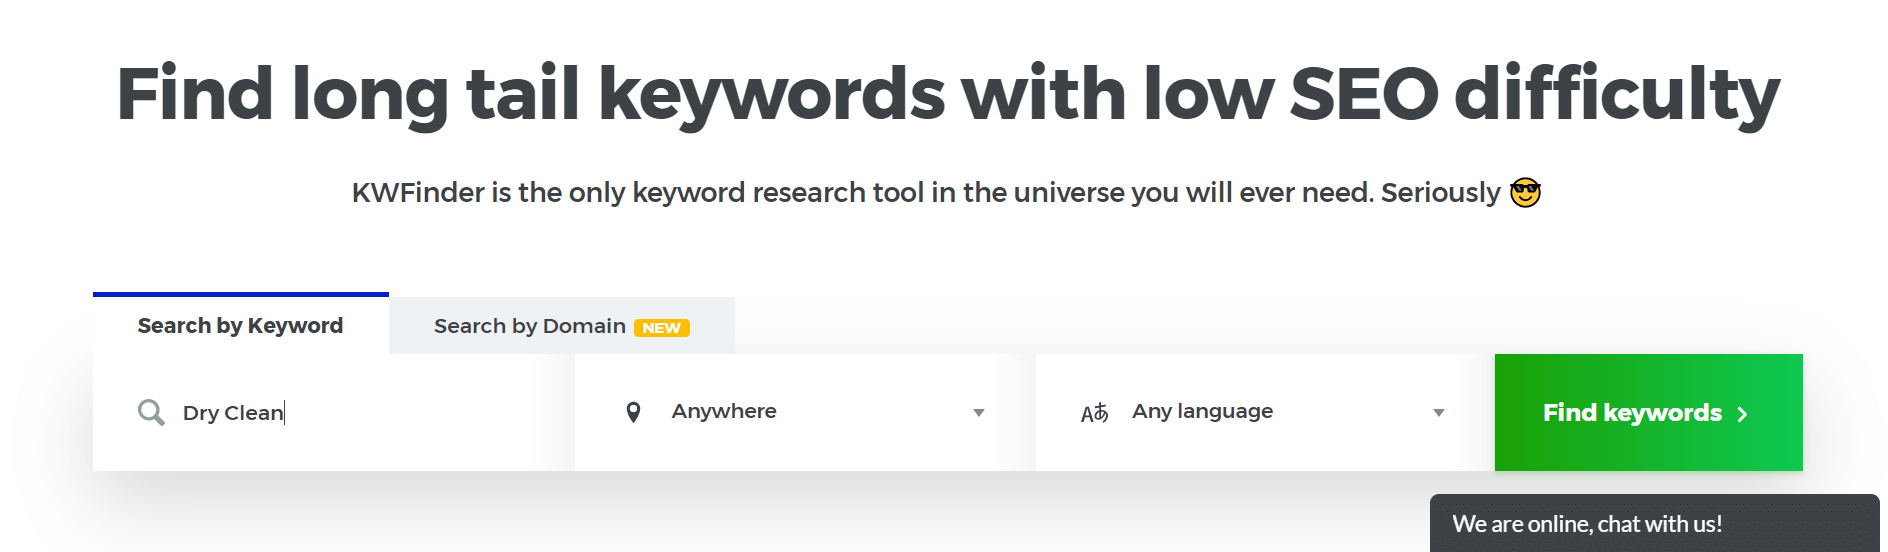 Keyword finder, the tool that helps with Keyword research.